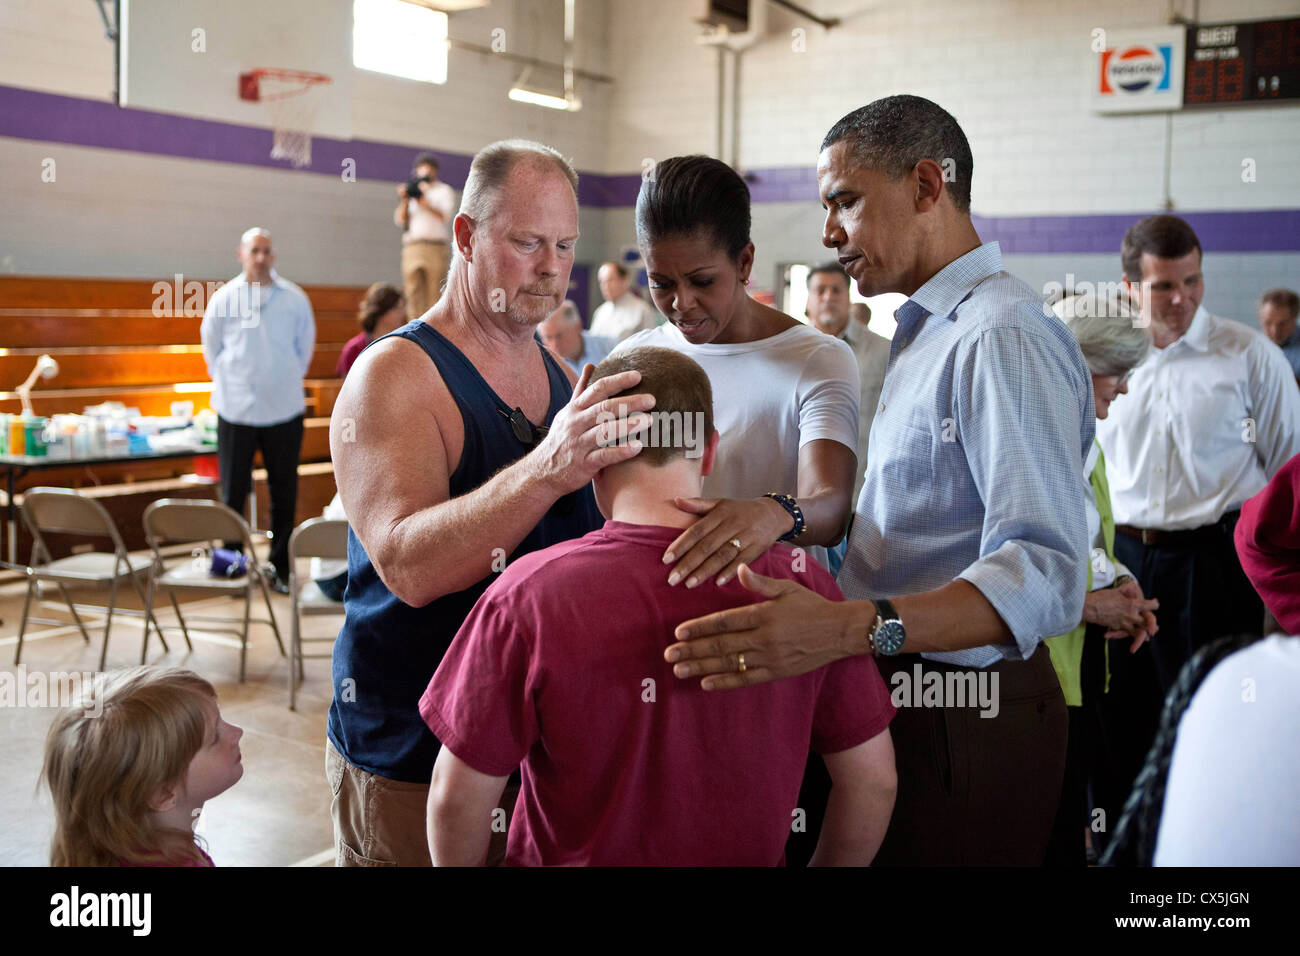 US President Barack Obama and First Lady Michelle Obama comfort people at Holt Elementary School April 29, 2011 in Holt, Alabama. The President and First Lady traveled to Alabama to visit storm damaged neighborhoods and meet with families affected by deadly tornados. Stock Photo